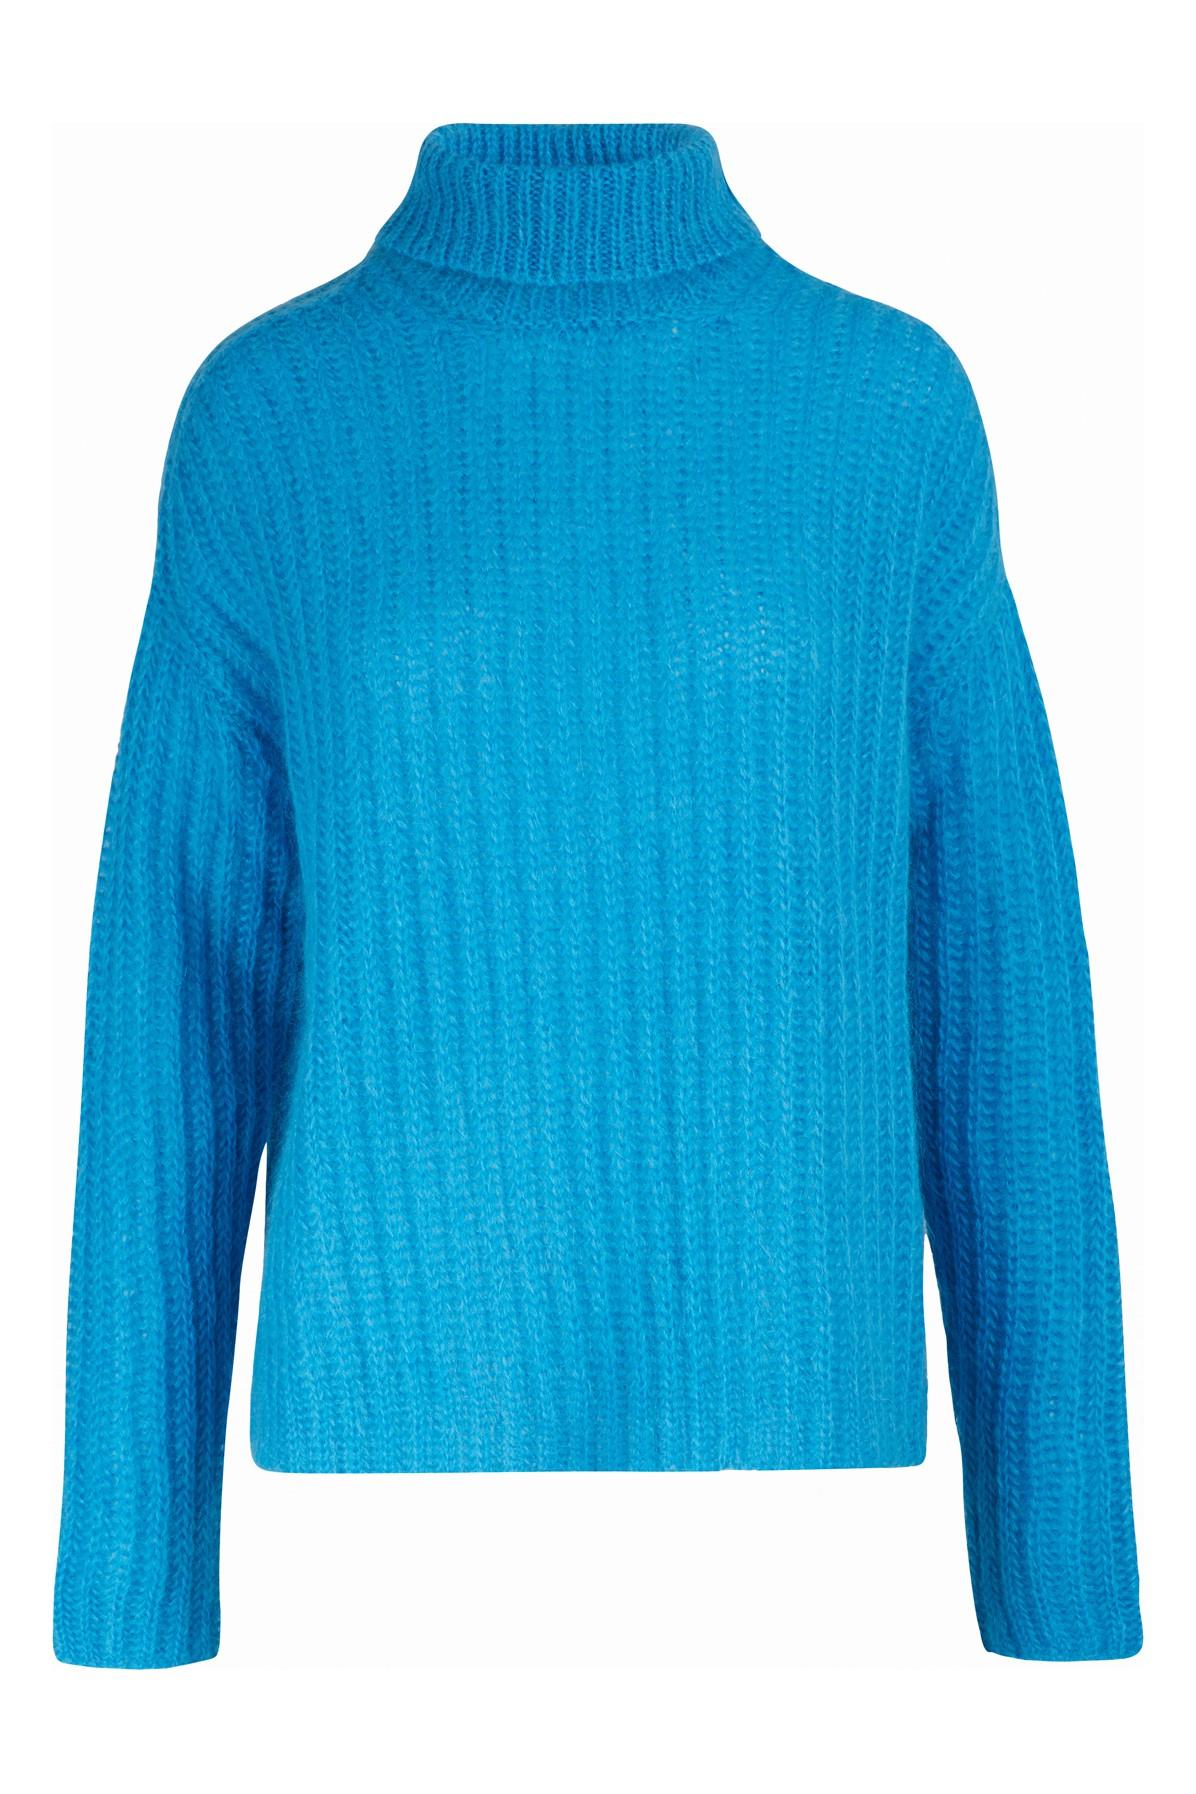 Marni Roll Neck Mohair Blend Sweater in Blue - Lyst